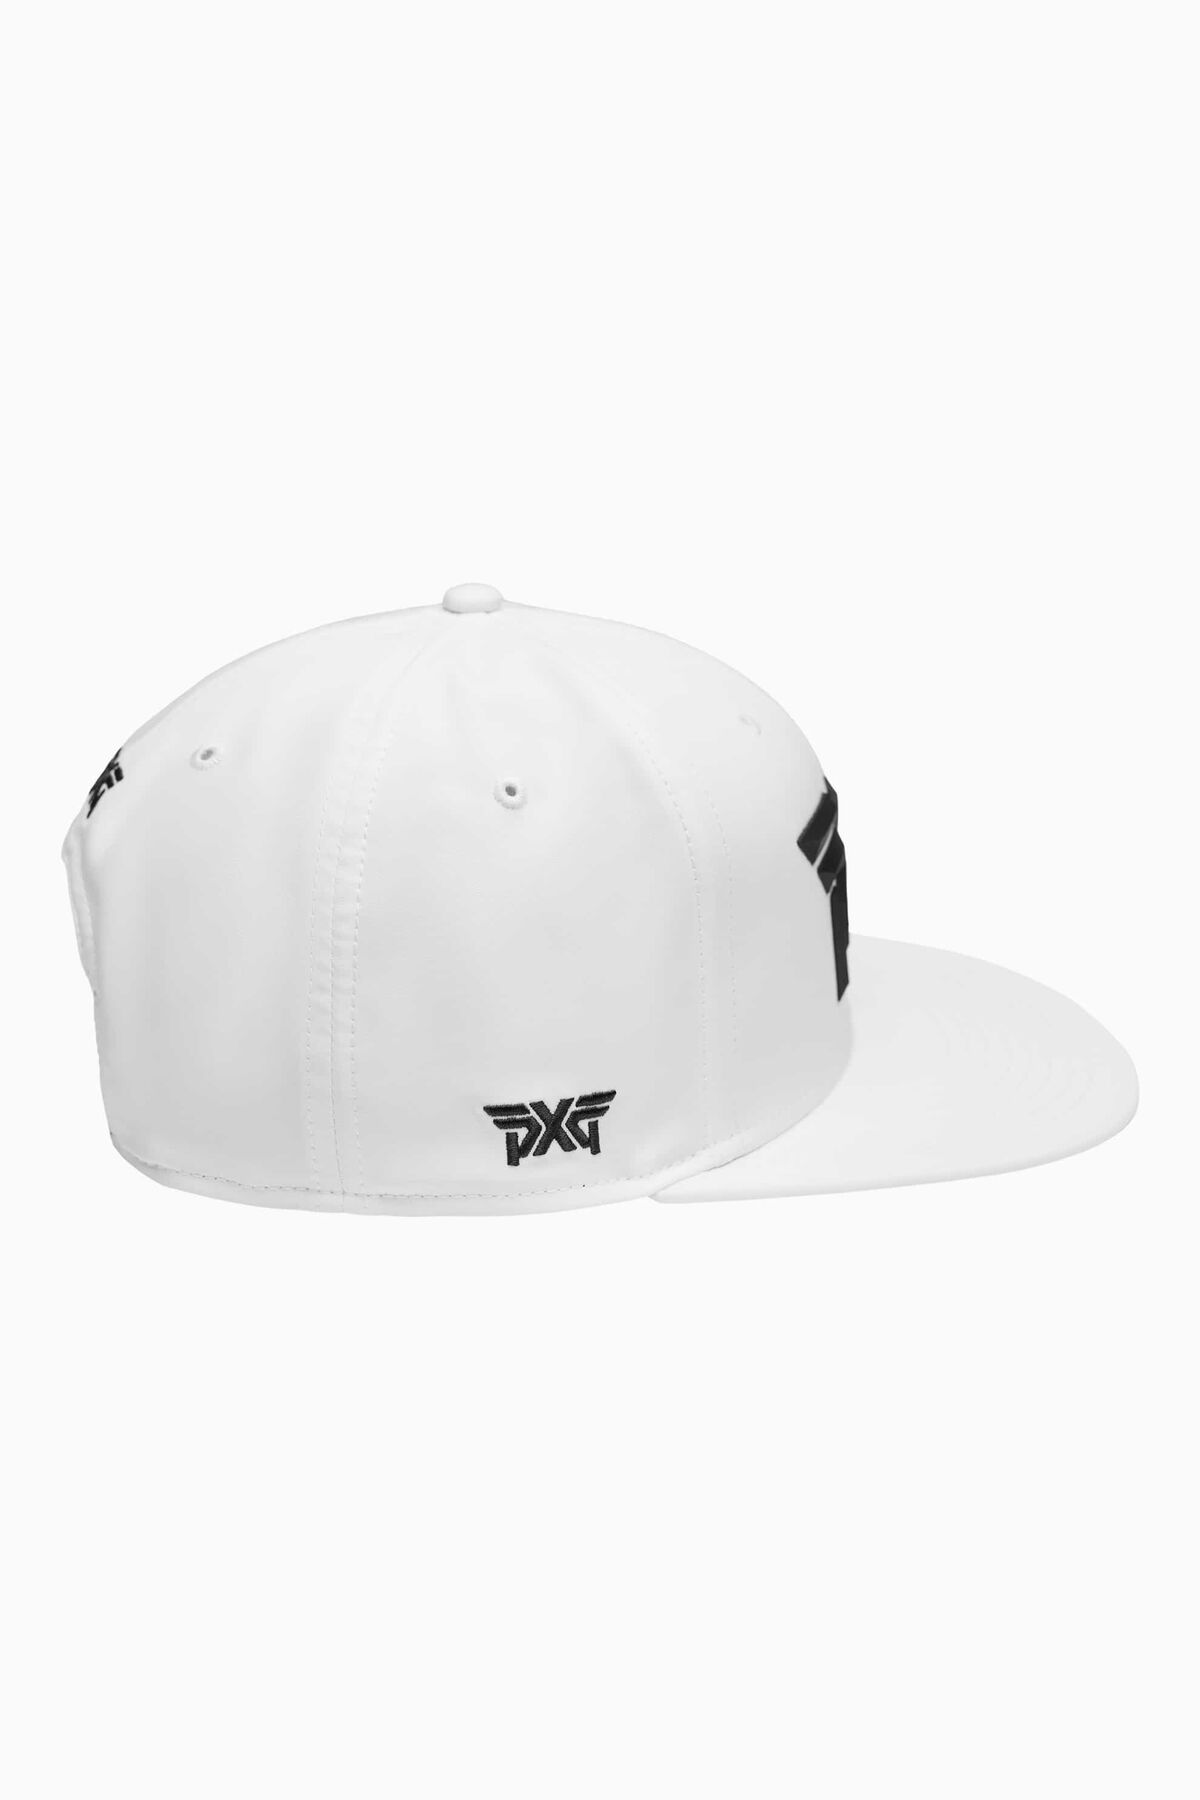 Faceted Large 6 Panel Structured Flat Bill Cap White